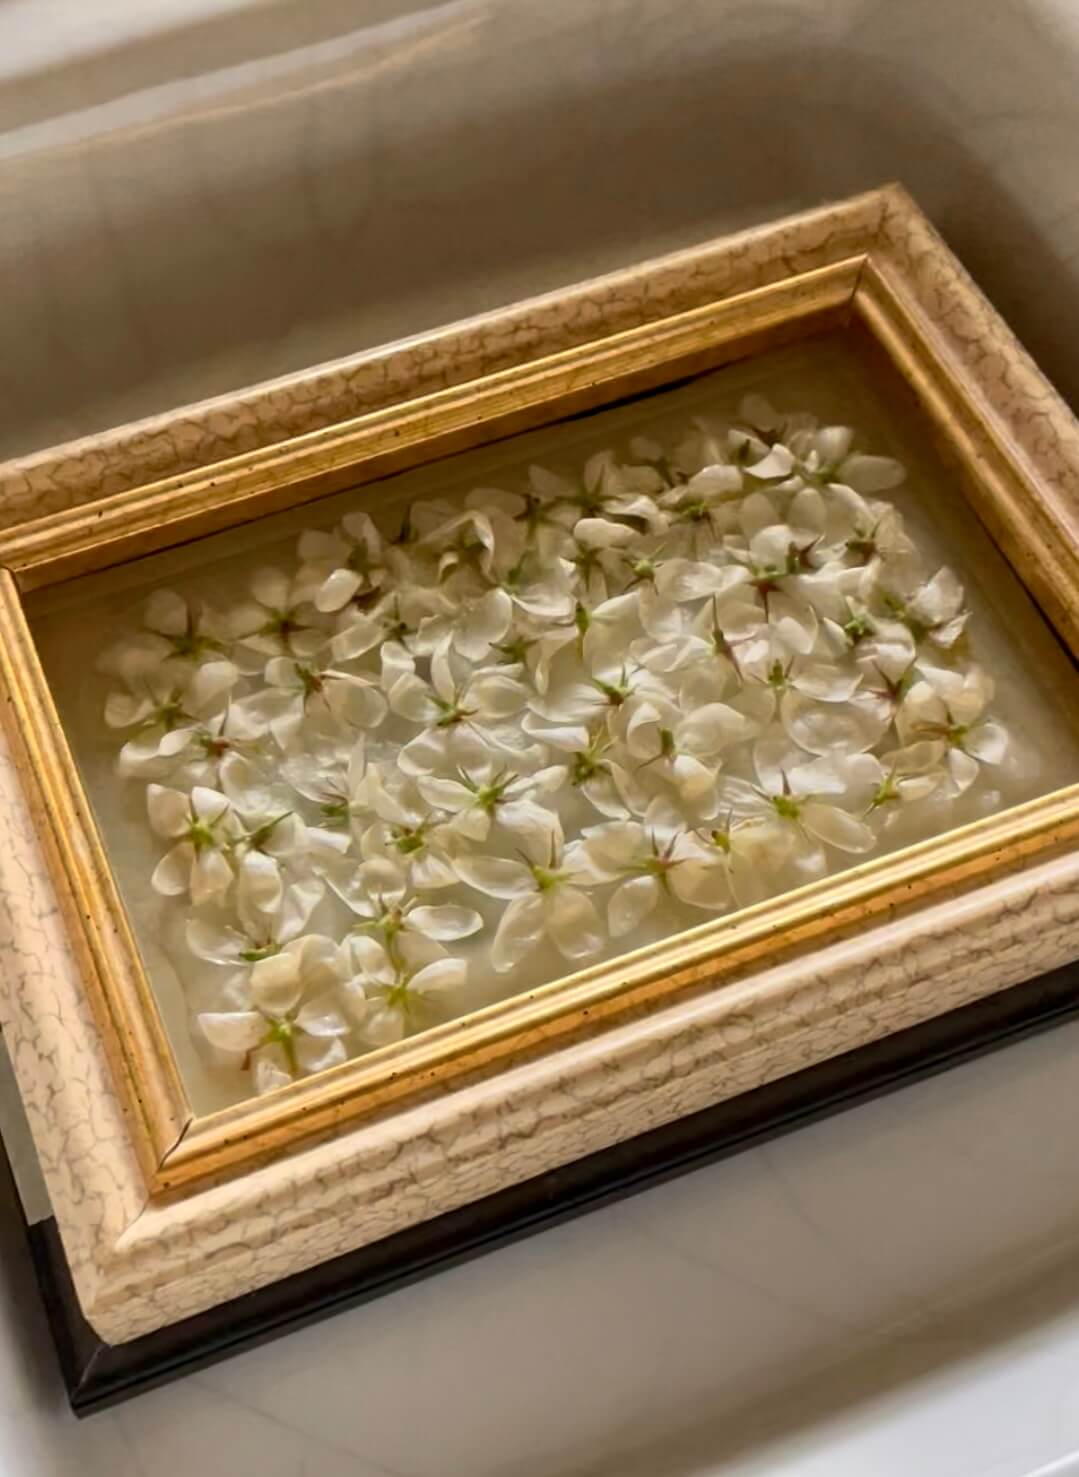 A golden frame containing white flowers in a white solid material.